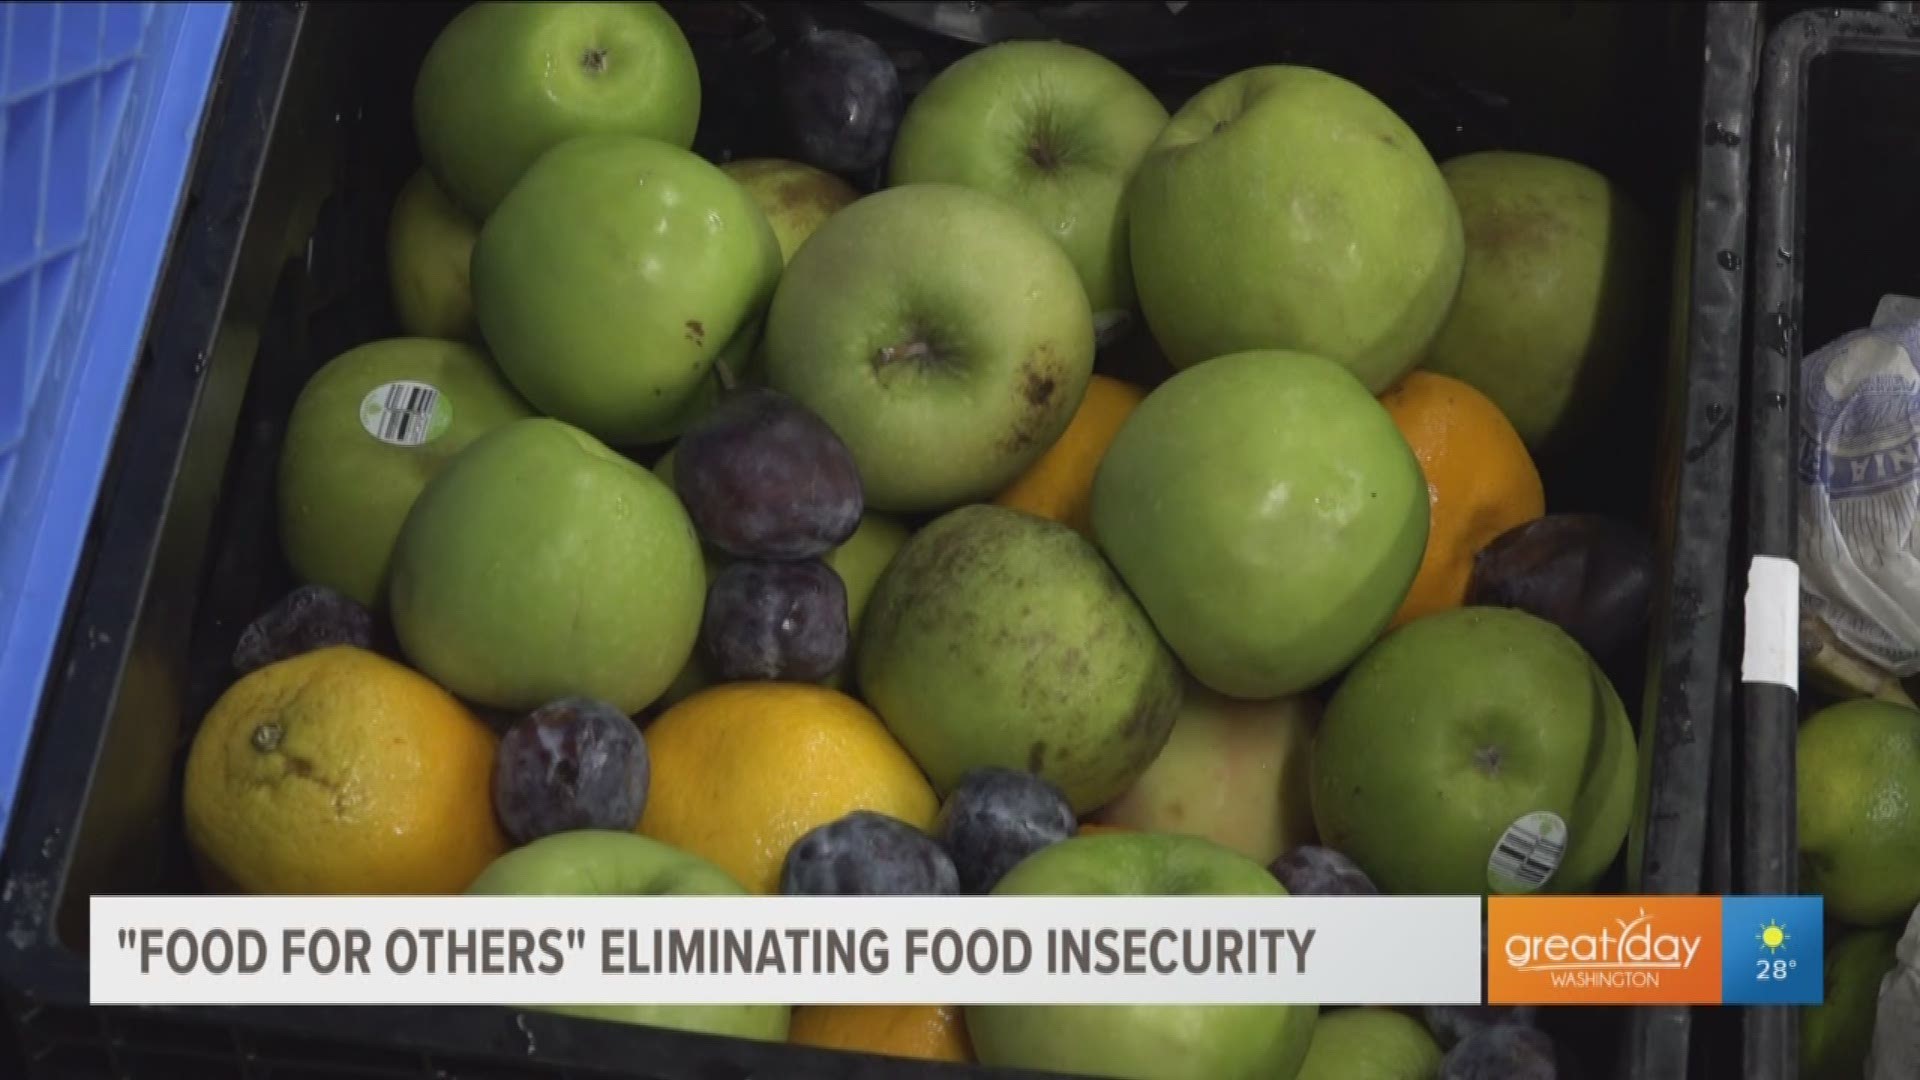 Food for Others is a group located in Fairfax that has one major goal- to end food insecurity. This segment was sponsored by Eastern Automotive Group.